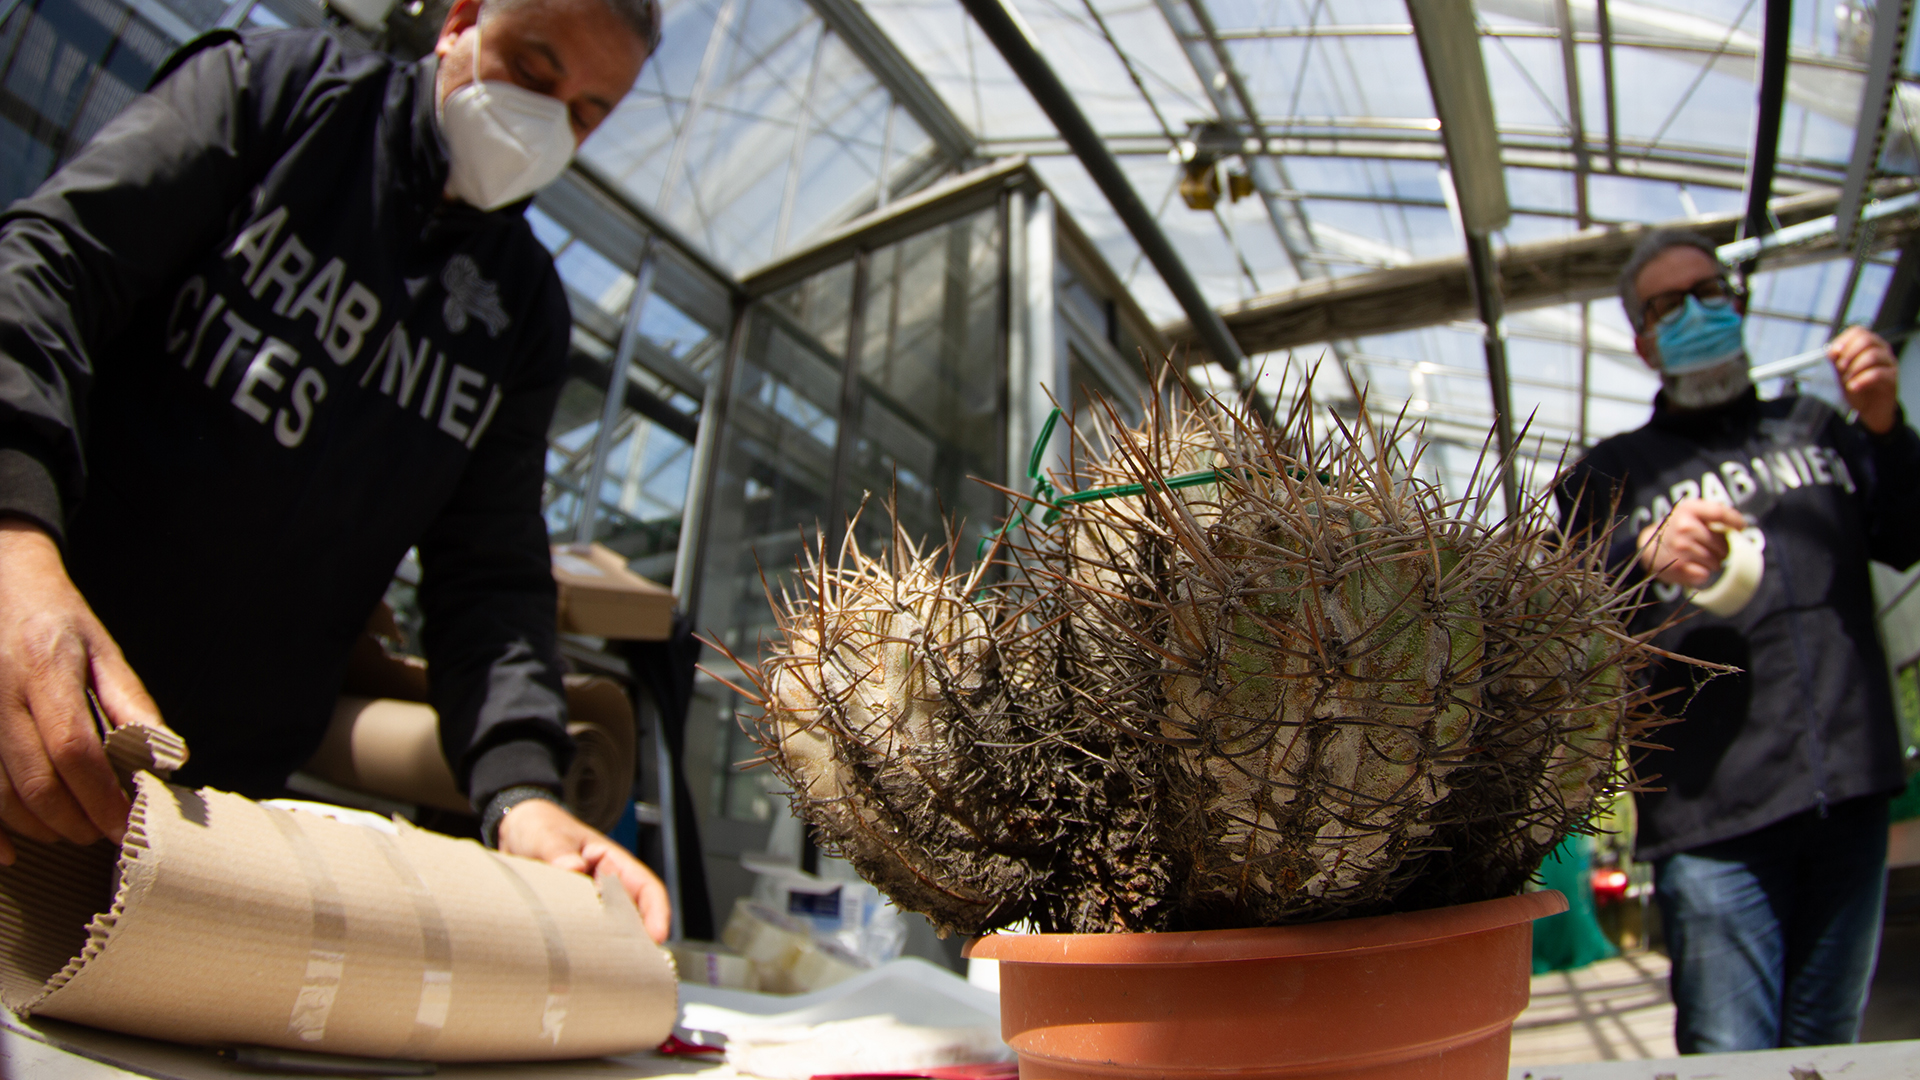 $1.2 million worth of rare, stolen cactuses confiscated and returned to Chile | Live Science